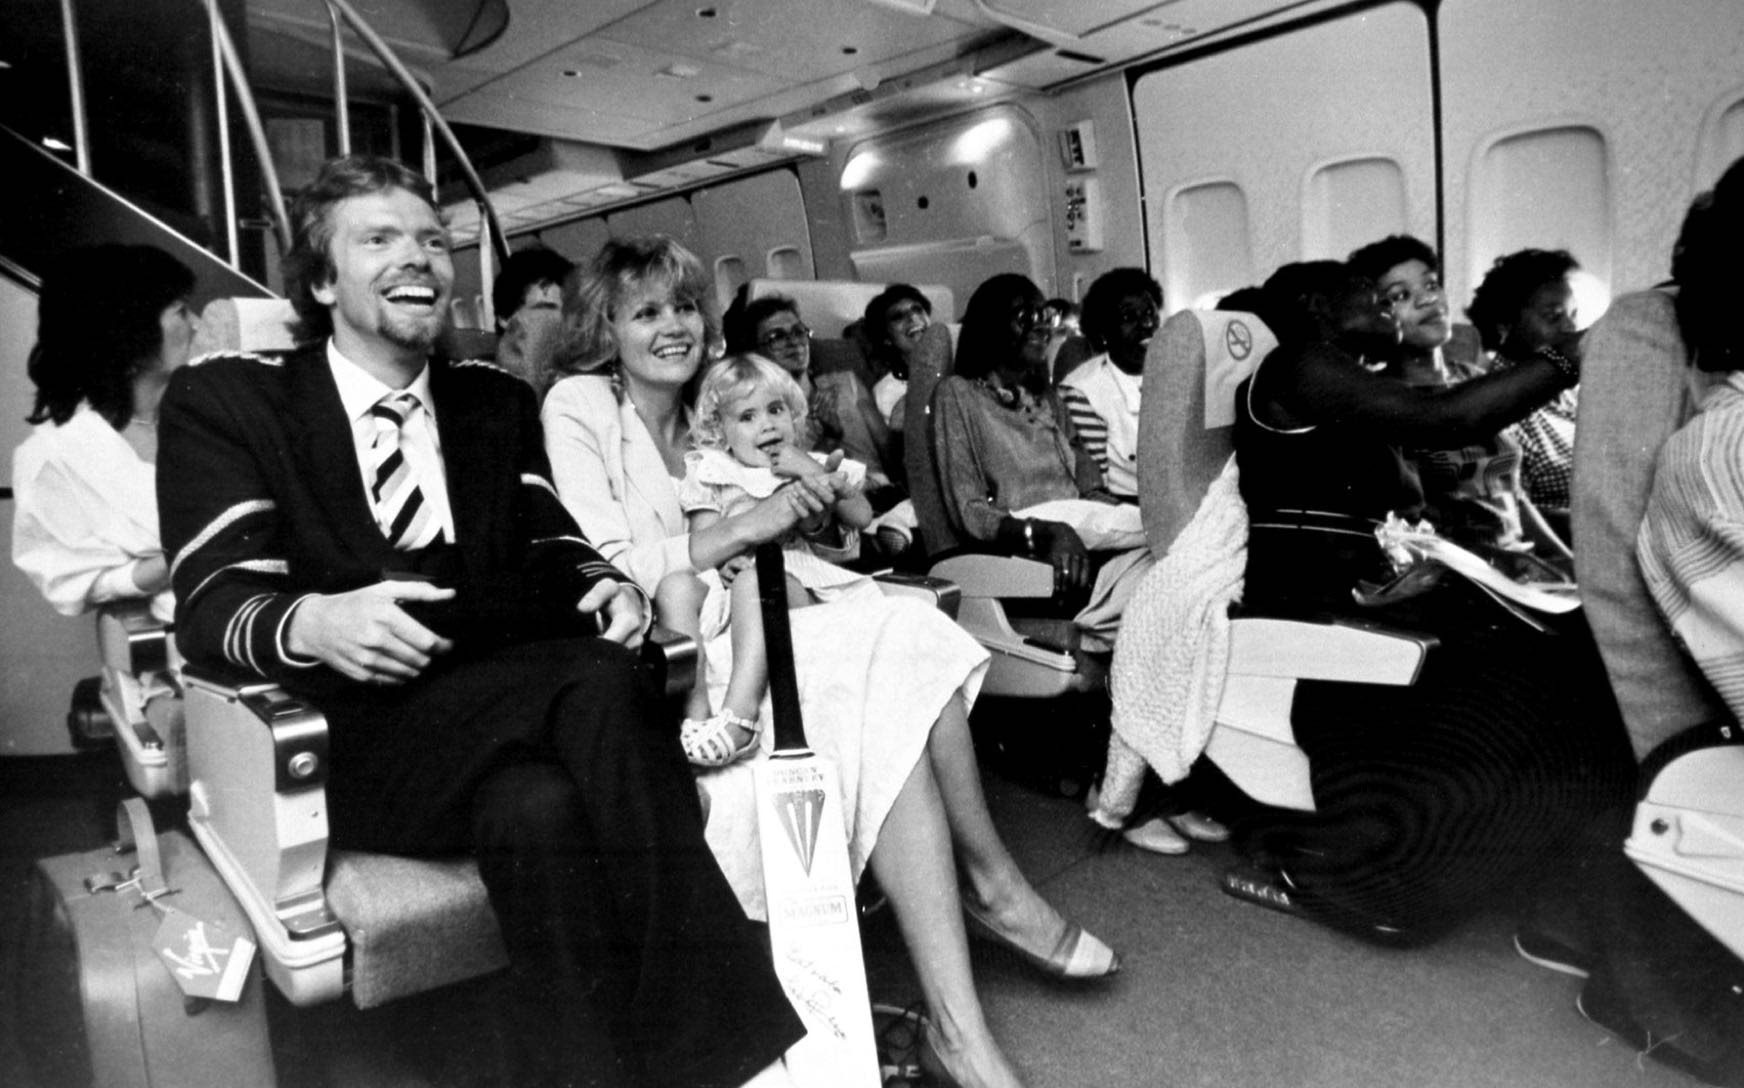 Richard and family on Virgin Atlantic's inaugural flight | Image from the Branson family.